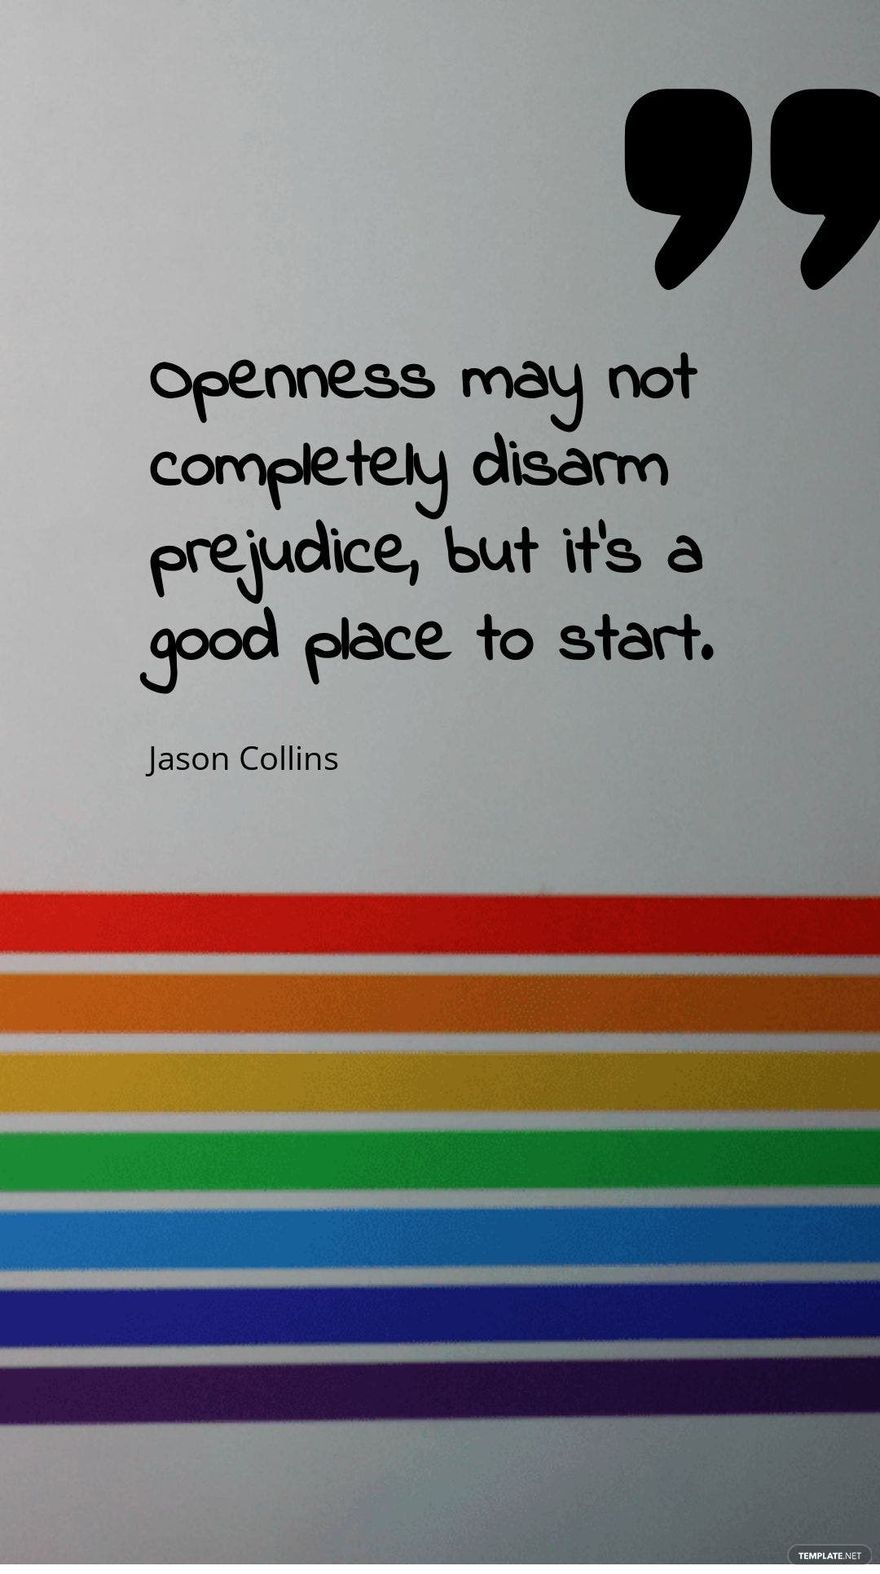 Jason Collins - Openness may not completely disarm prejudice, but it's a good place to start.